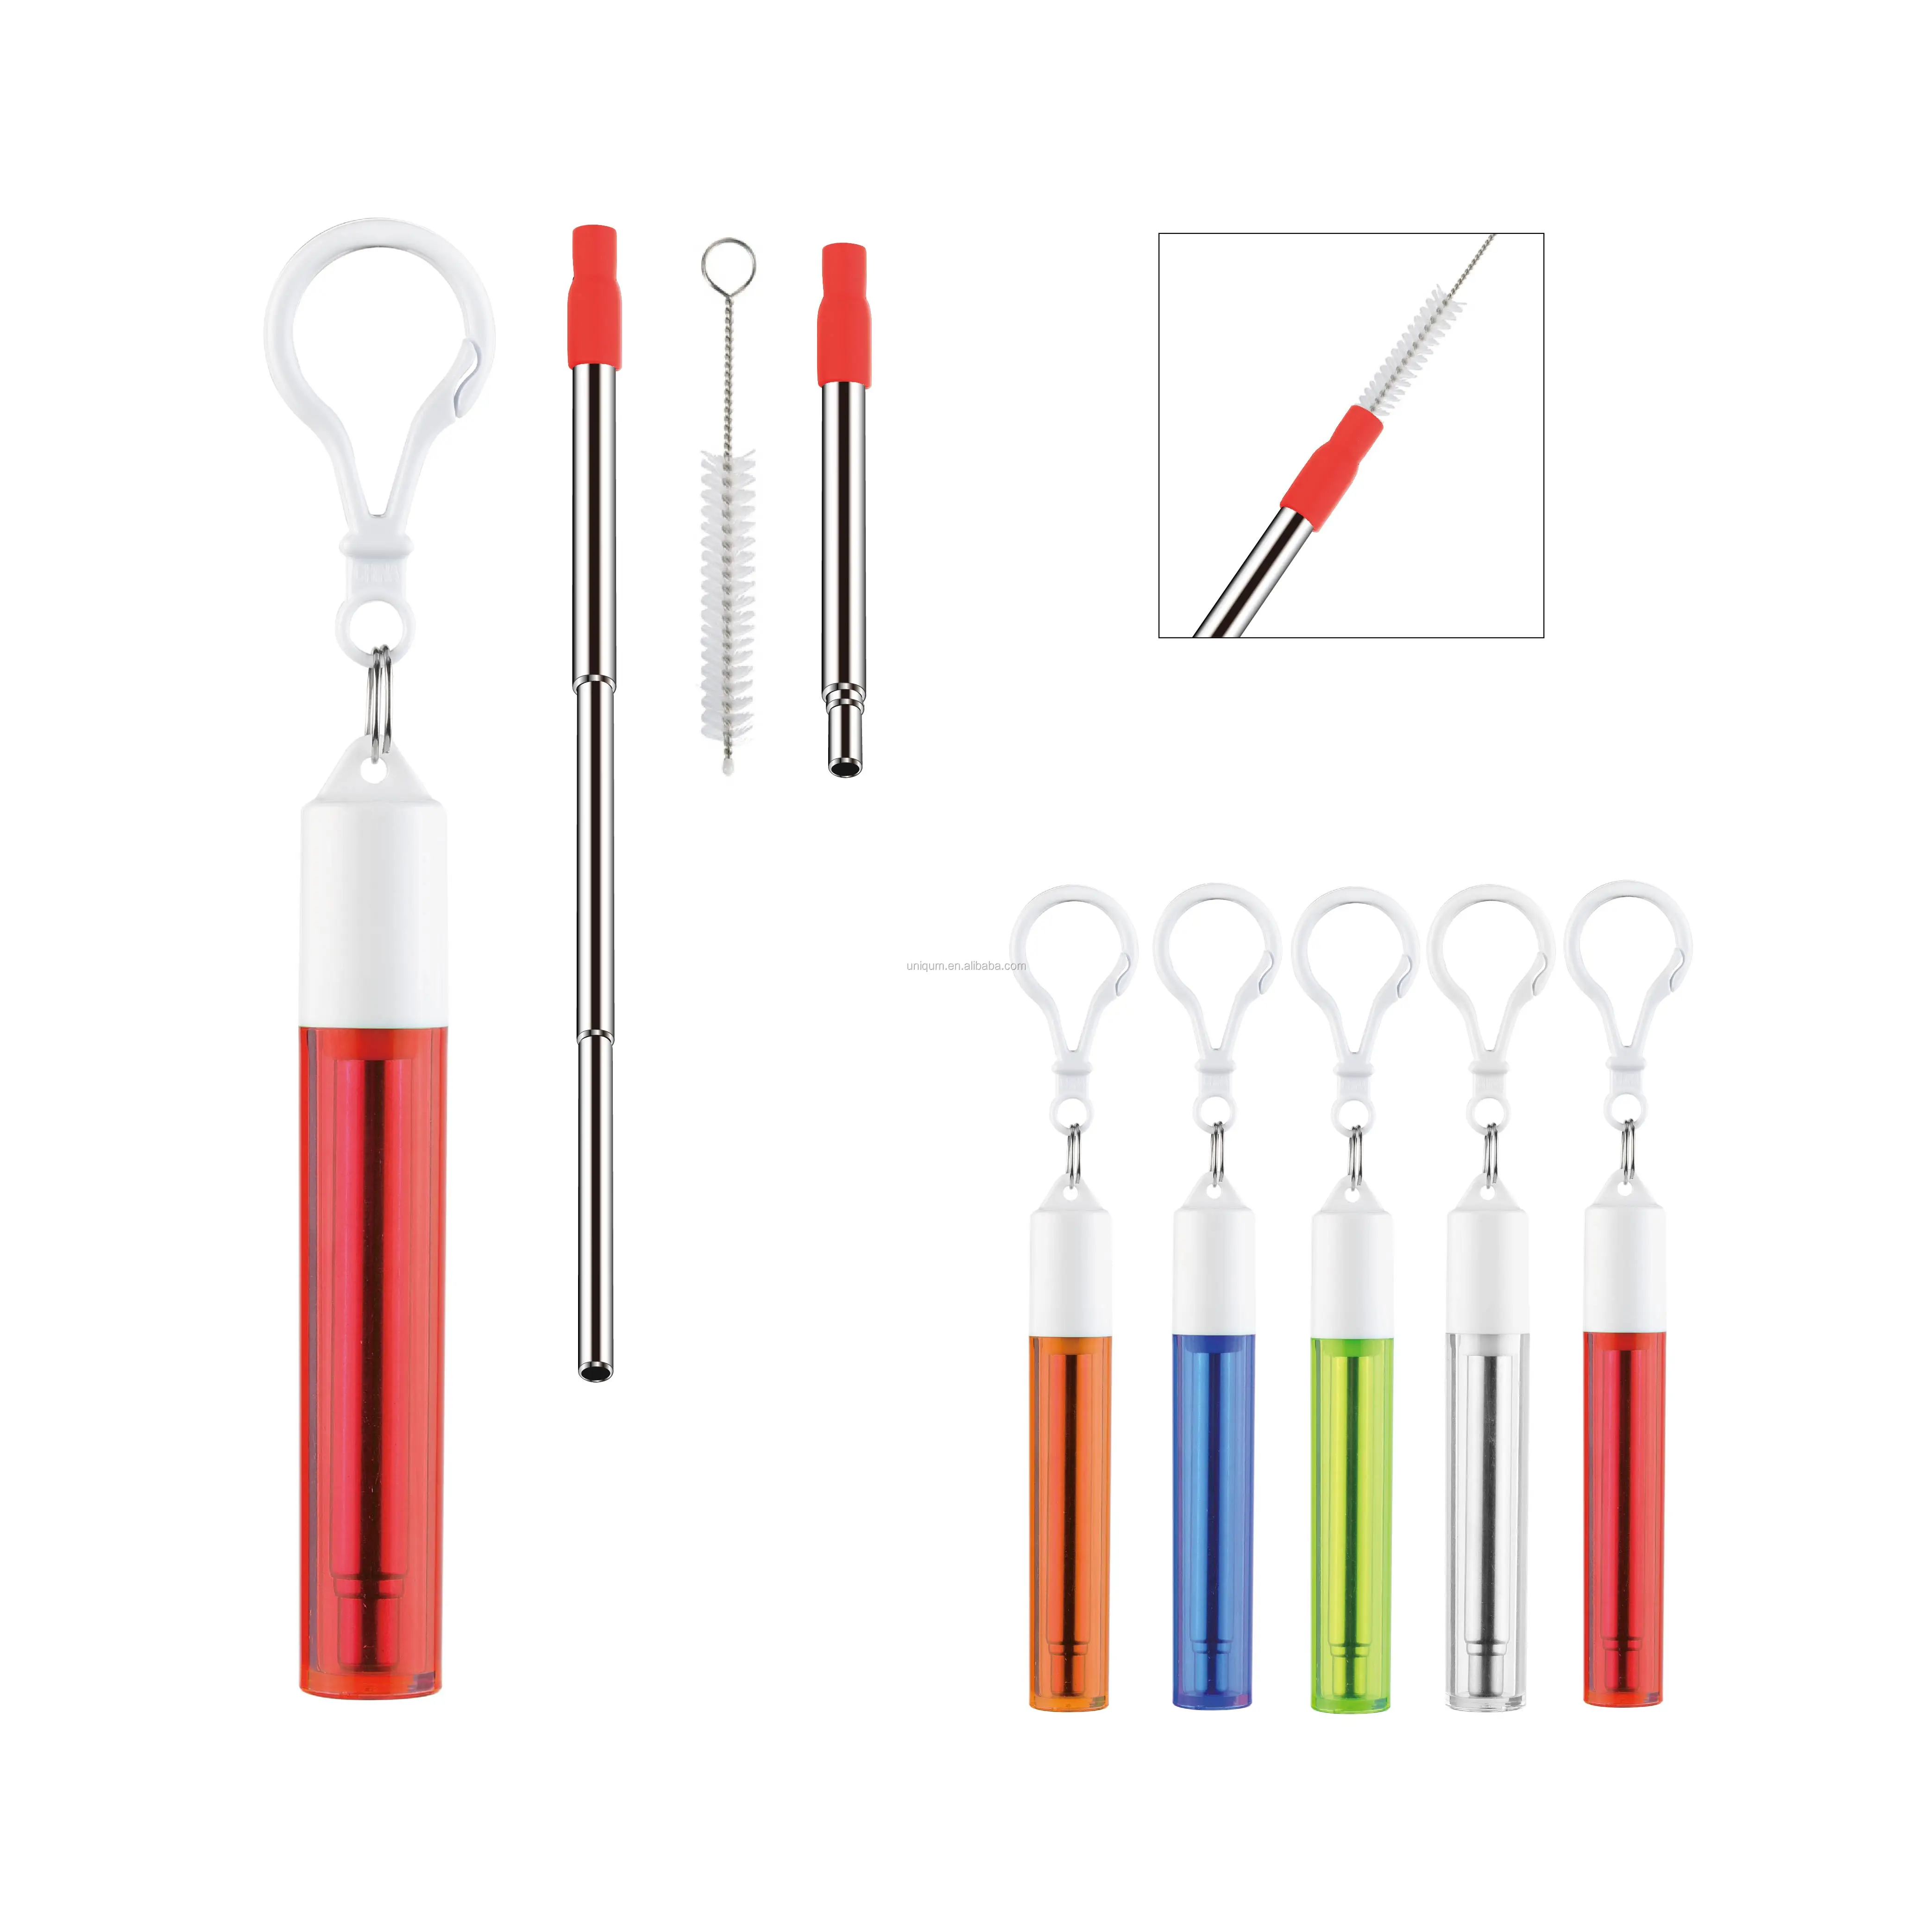 BPA Free Reusable Telescopic Metal Straw Retractable Stainless Steel Straw Collapsible Straw